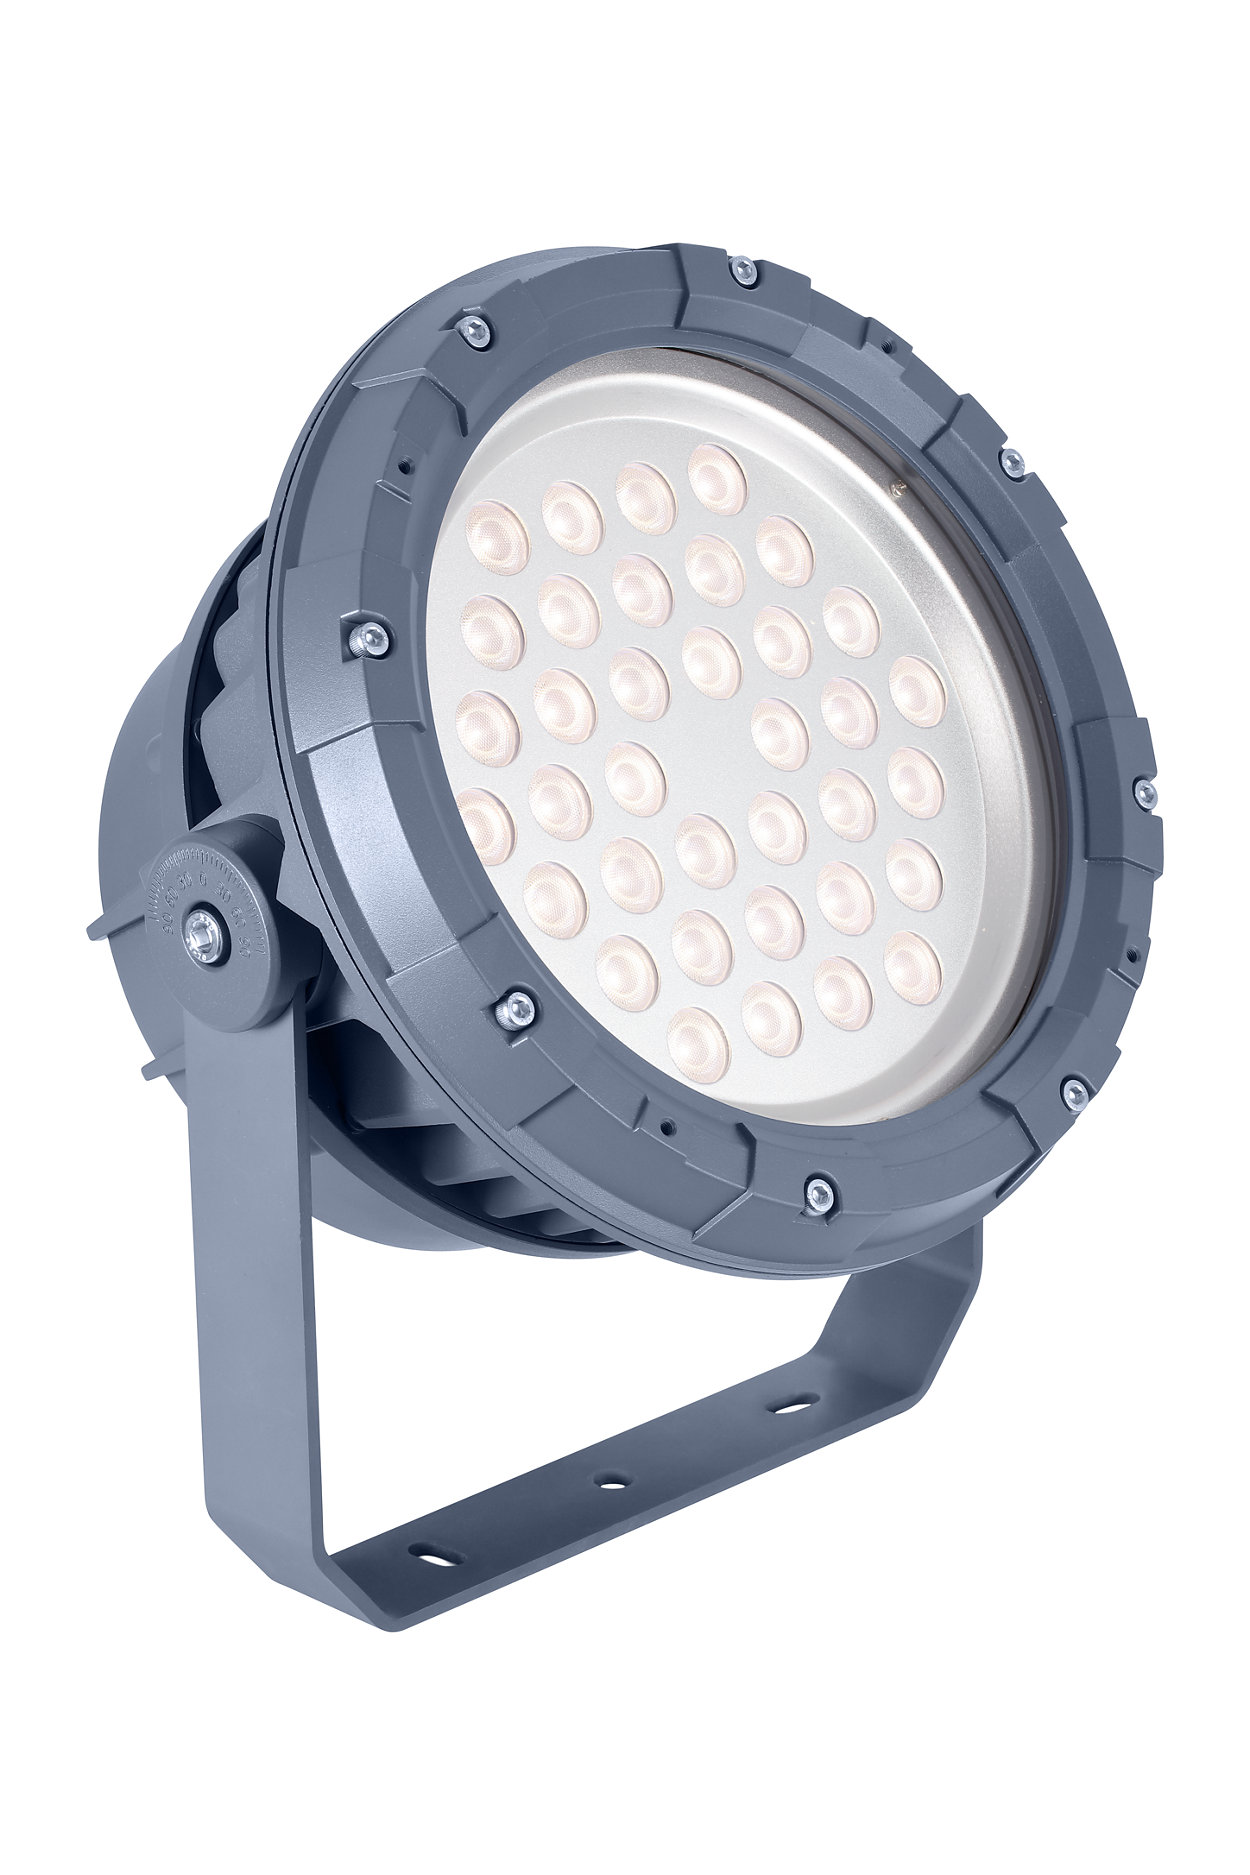 Architectural LED floodlight for fixed or dynamic lighting.